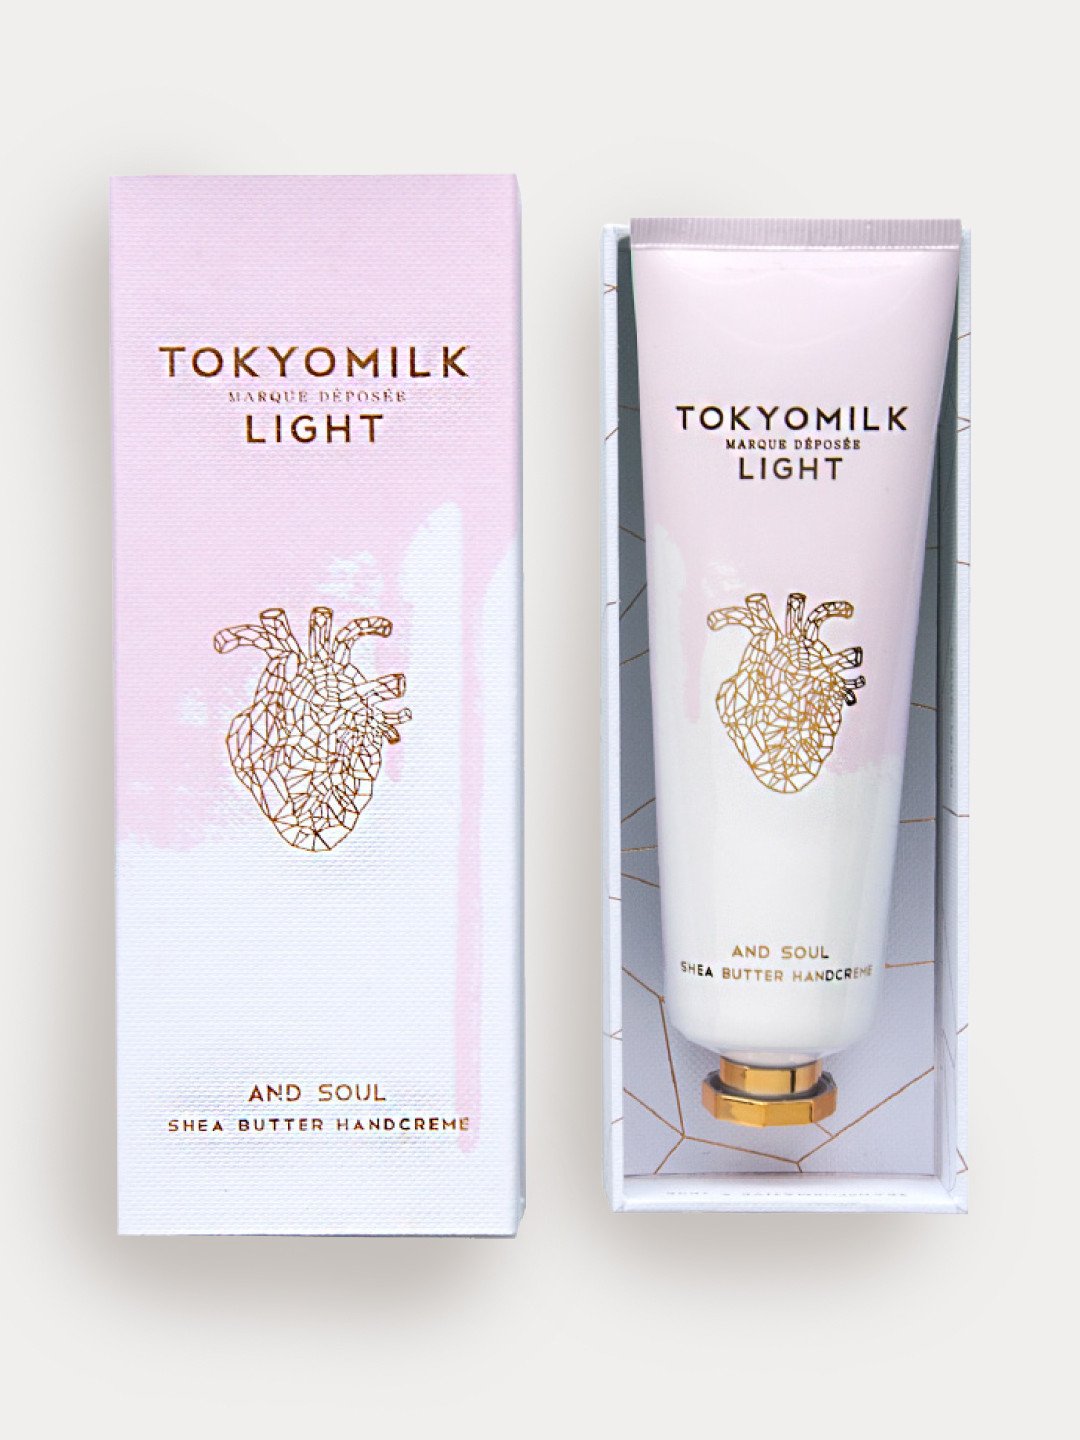 A tube of Margot Elena TokyoMilk Light And Soul No. 01 shea butter hand cream next to its packaging box, both featuring an artistic, golden anatomical heart design on a pale pink background.